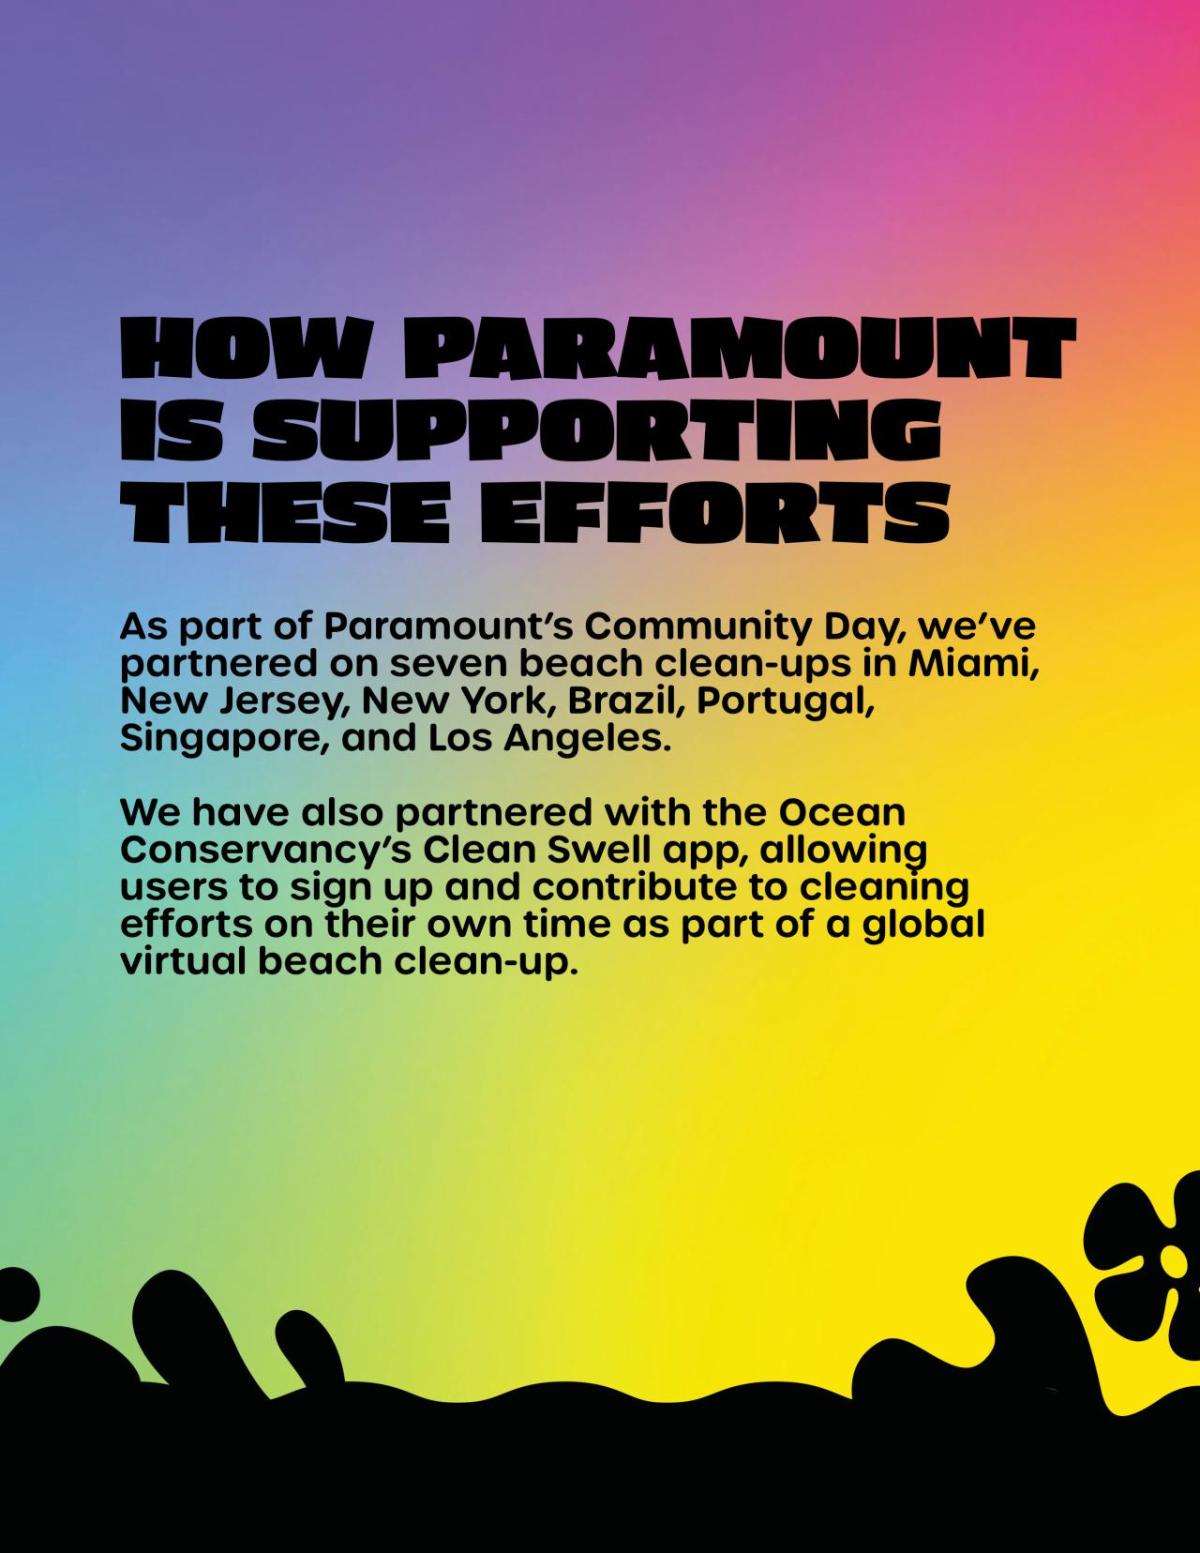 "HOW PARAMOUNT IS SUPPORTING THESE EFFORTS"